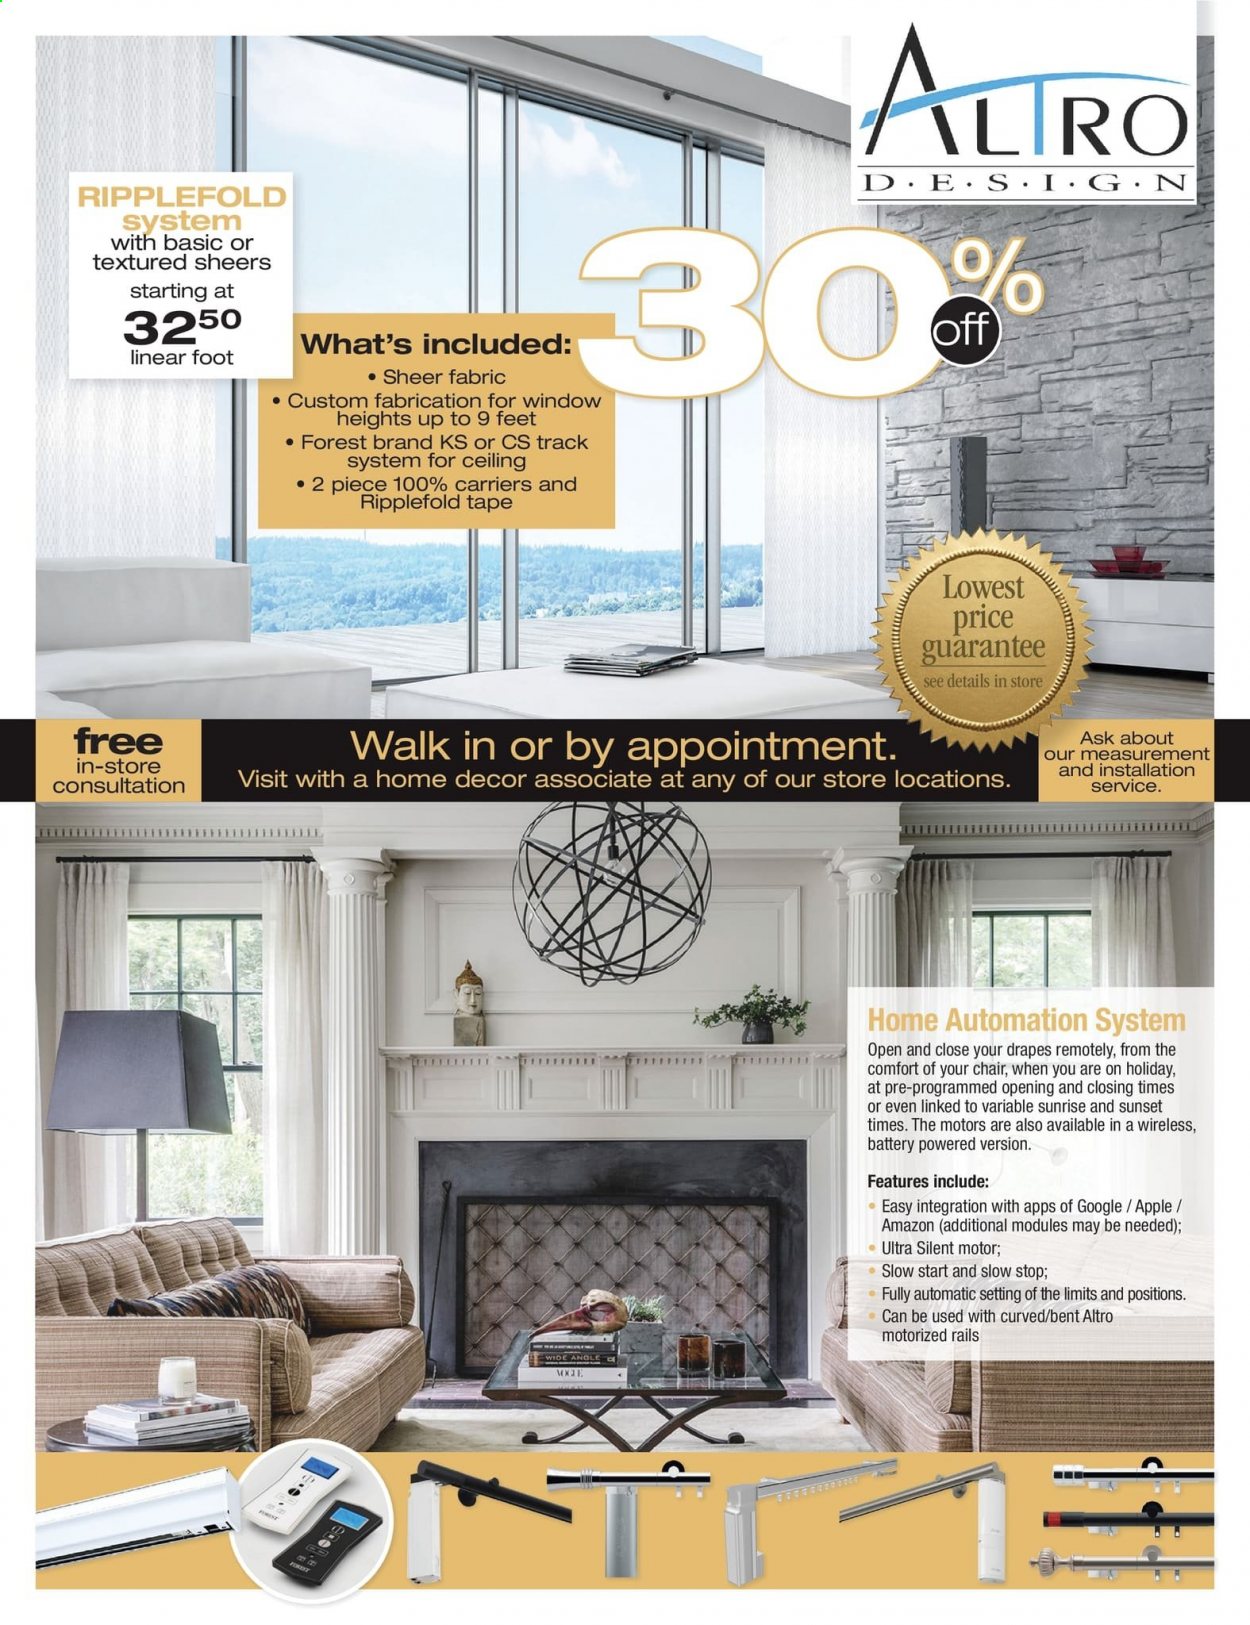 Fabricville flyer  - May 24, 2021 - June 20, 2021.